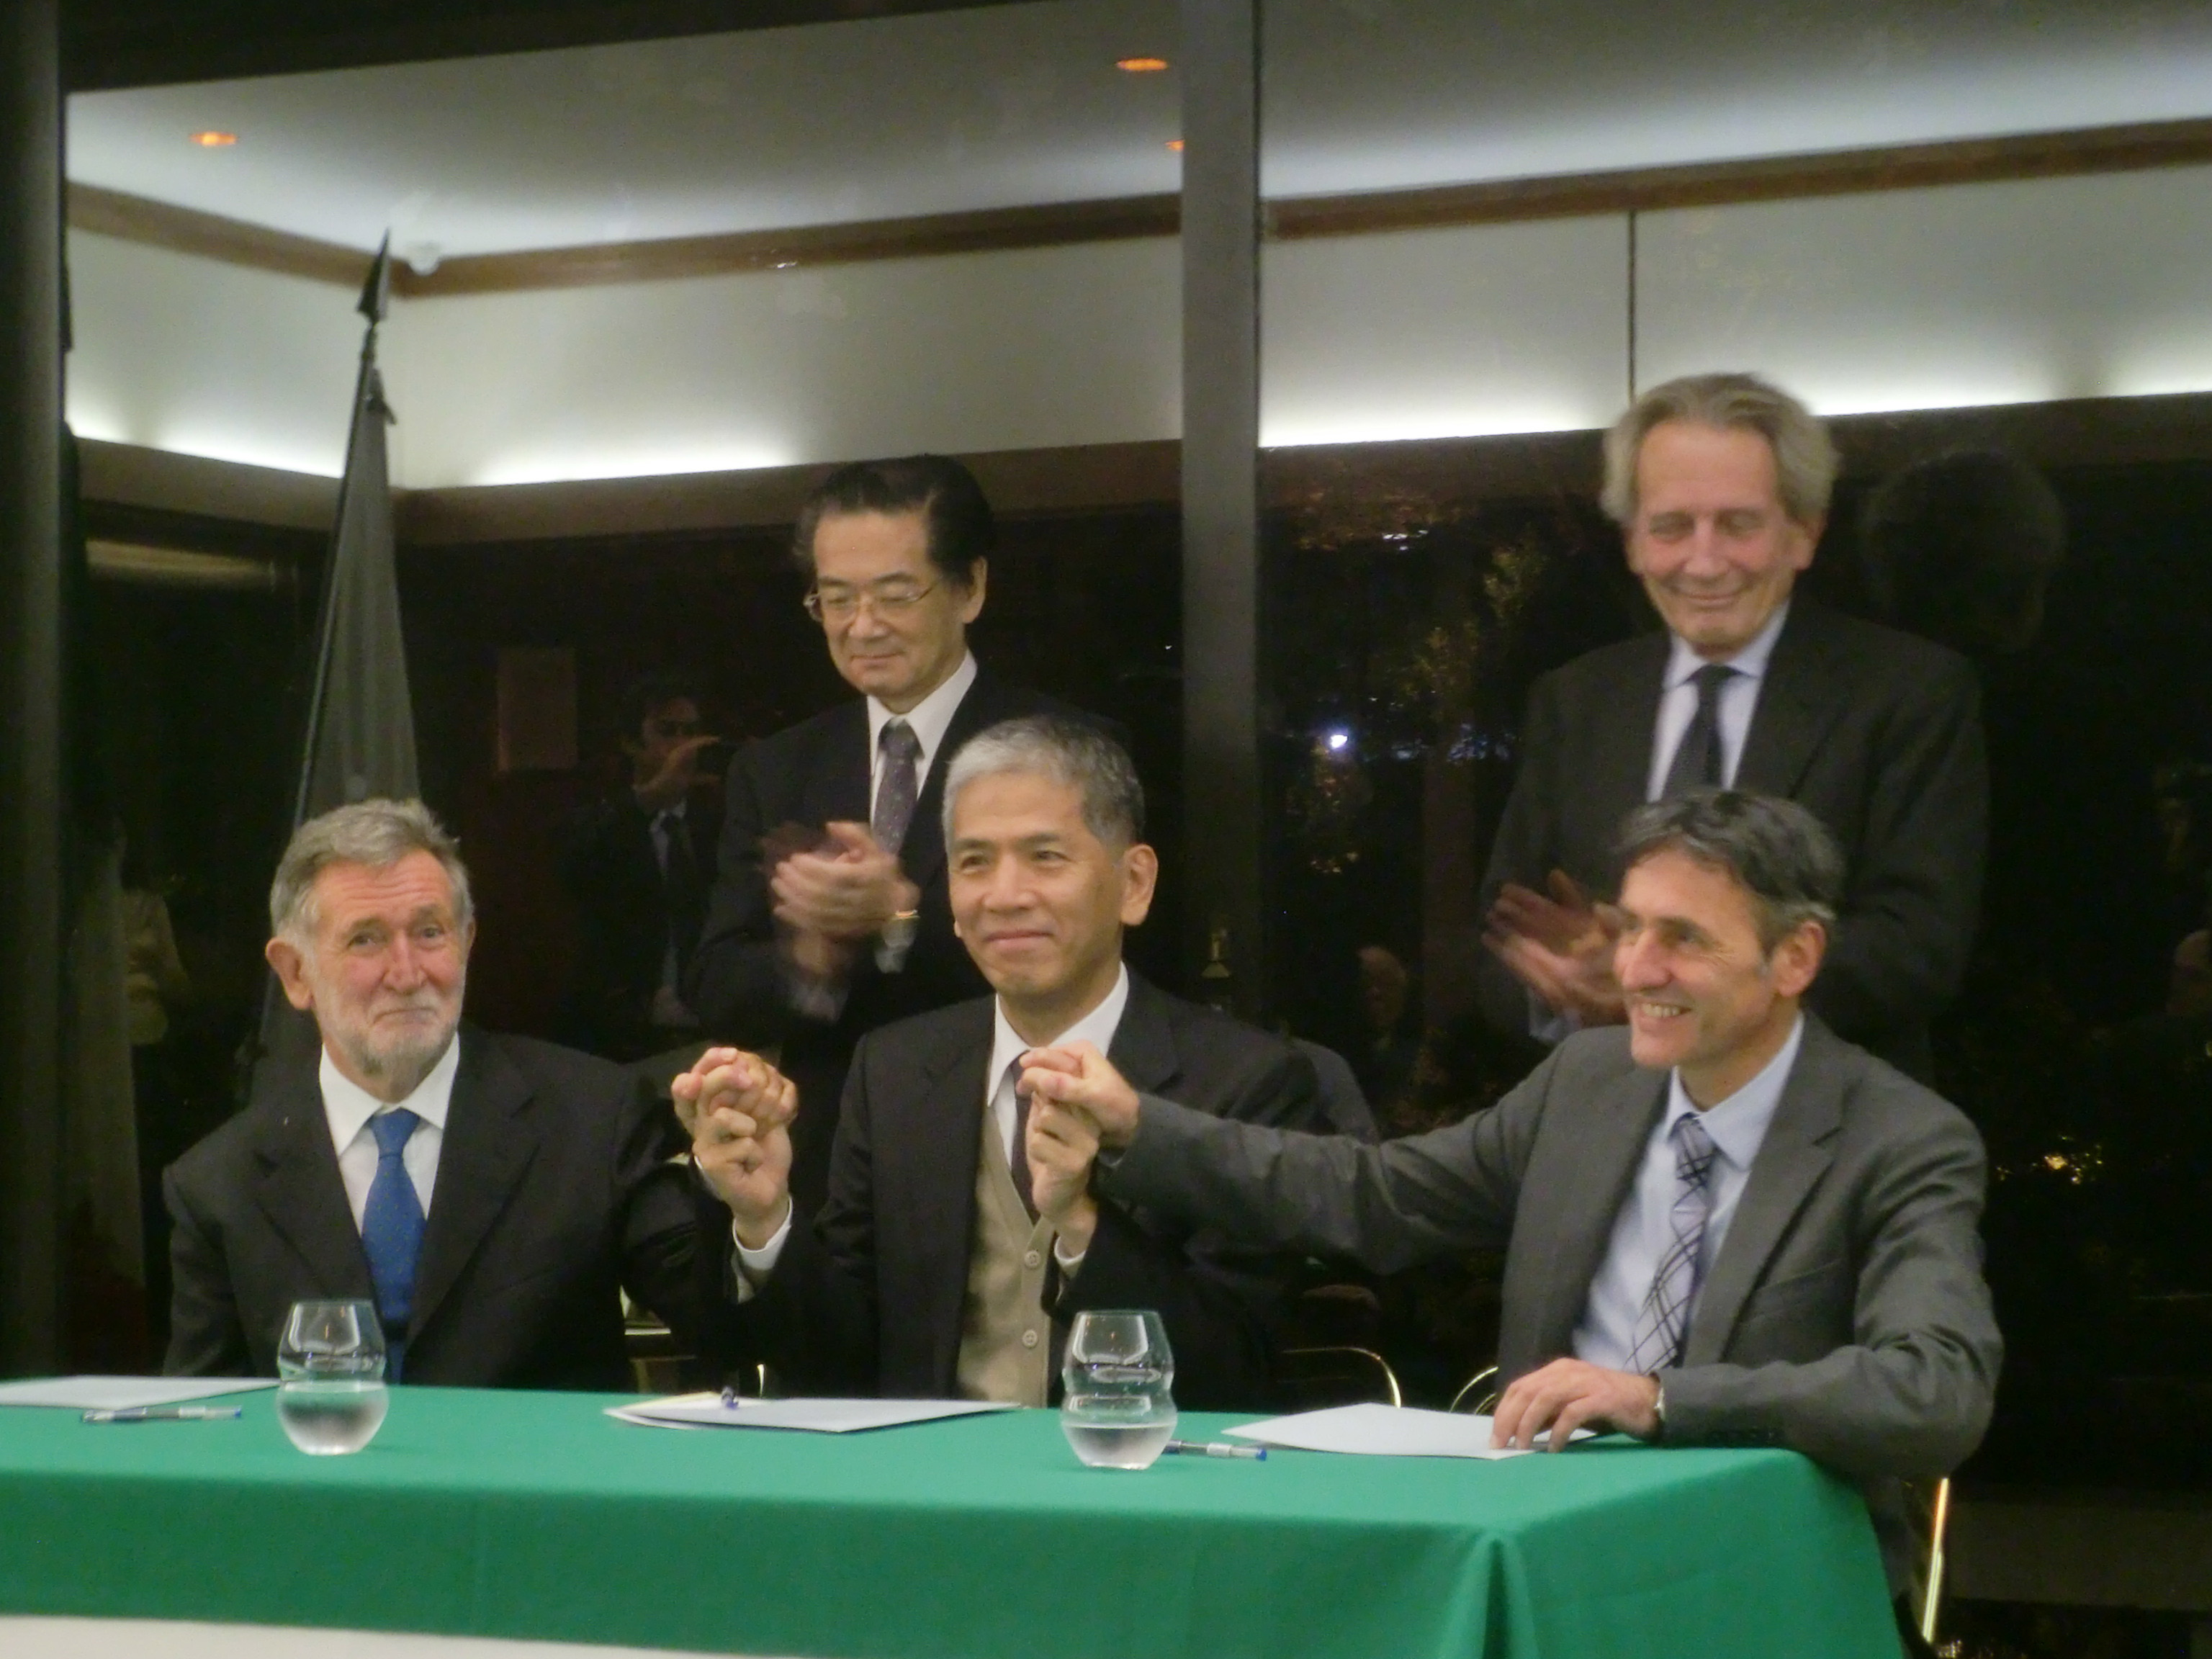 (Front row from left) professor Paolo Strolin, deputy president of the INFN; professor Takehiro Koyaguchi, director of the ERA; and Paolo Papale, director of the INGV's volcano section, sign a letter of intent in the presence of the Italian Ambasador Domenico Giorgi (second row, right) and Makoto Katsura, ambassador for science and technology cooperation of the Ministry of Foreign Affairs on Nov. 12 at the Italian Embassy in Tokyo. | CHIHO IUCHI